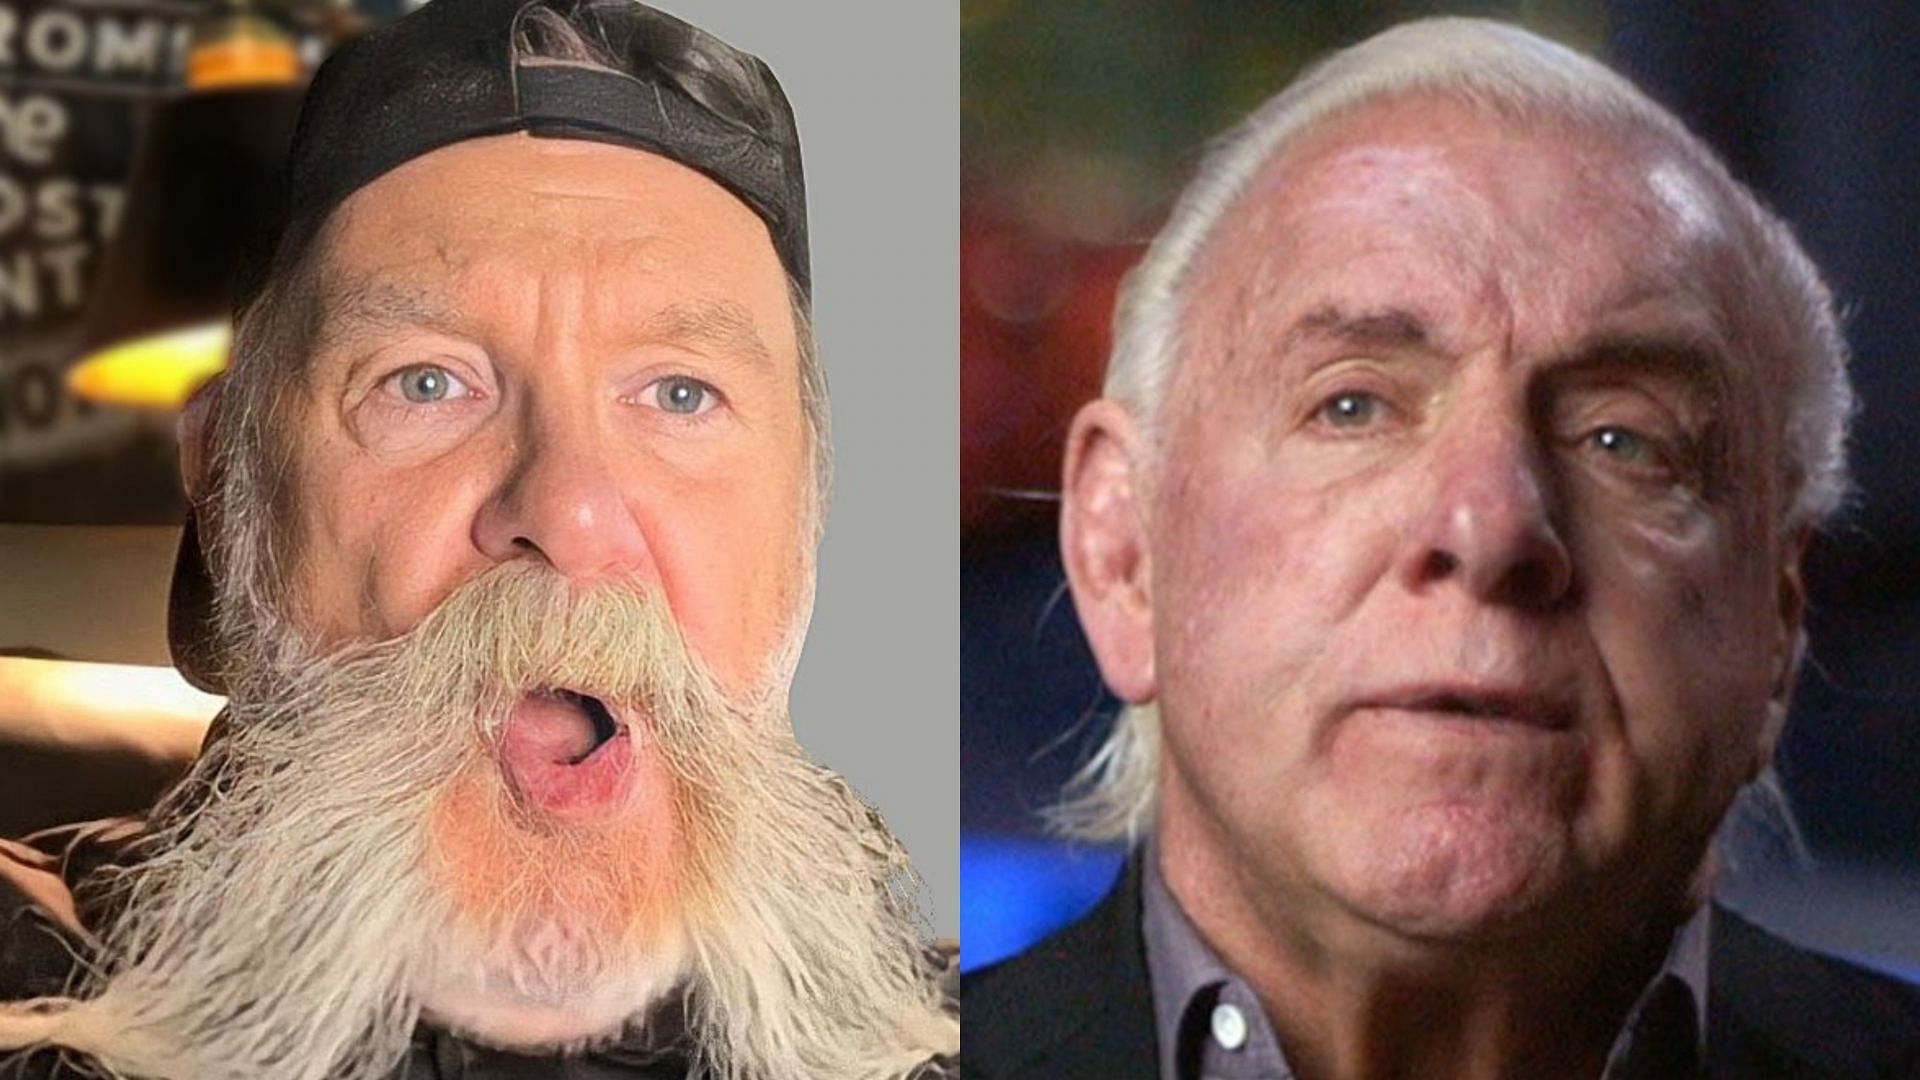 Dutch Mantell (left) and WWE Hall of Famer Ric Flair (right)